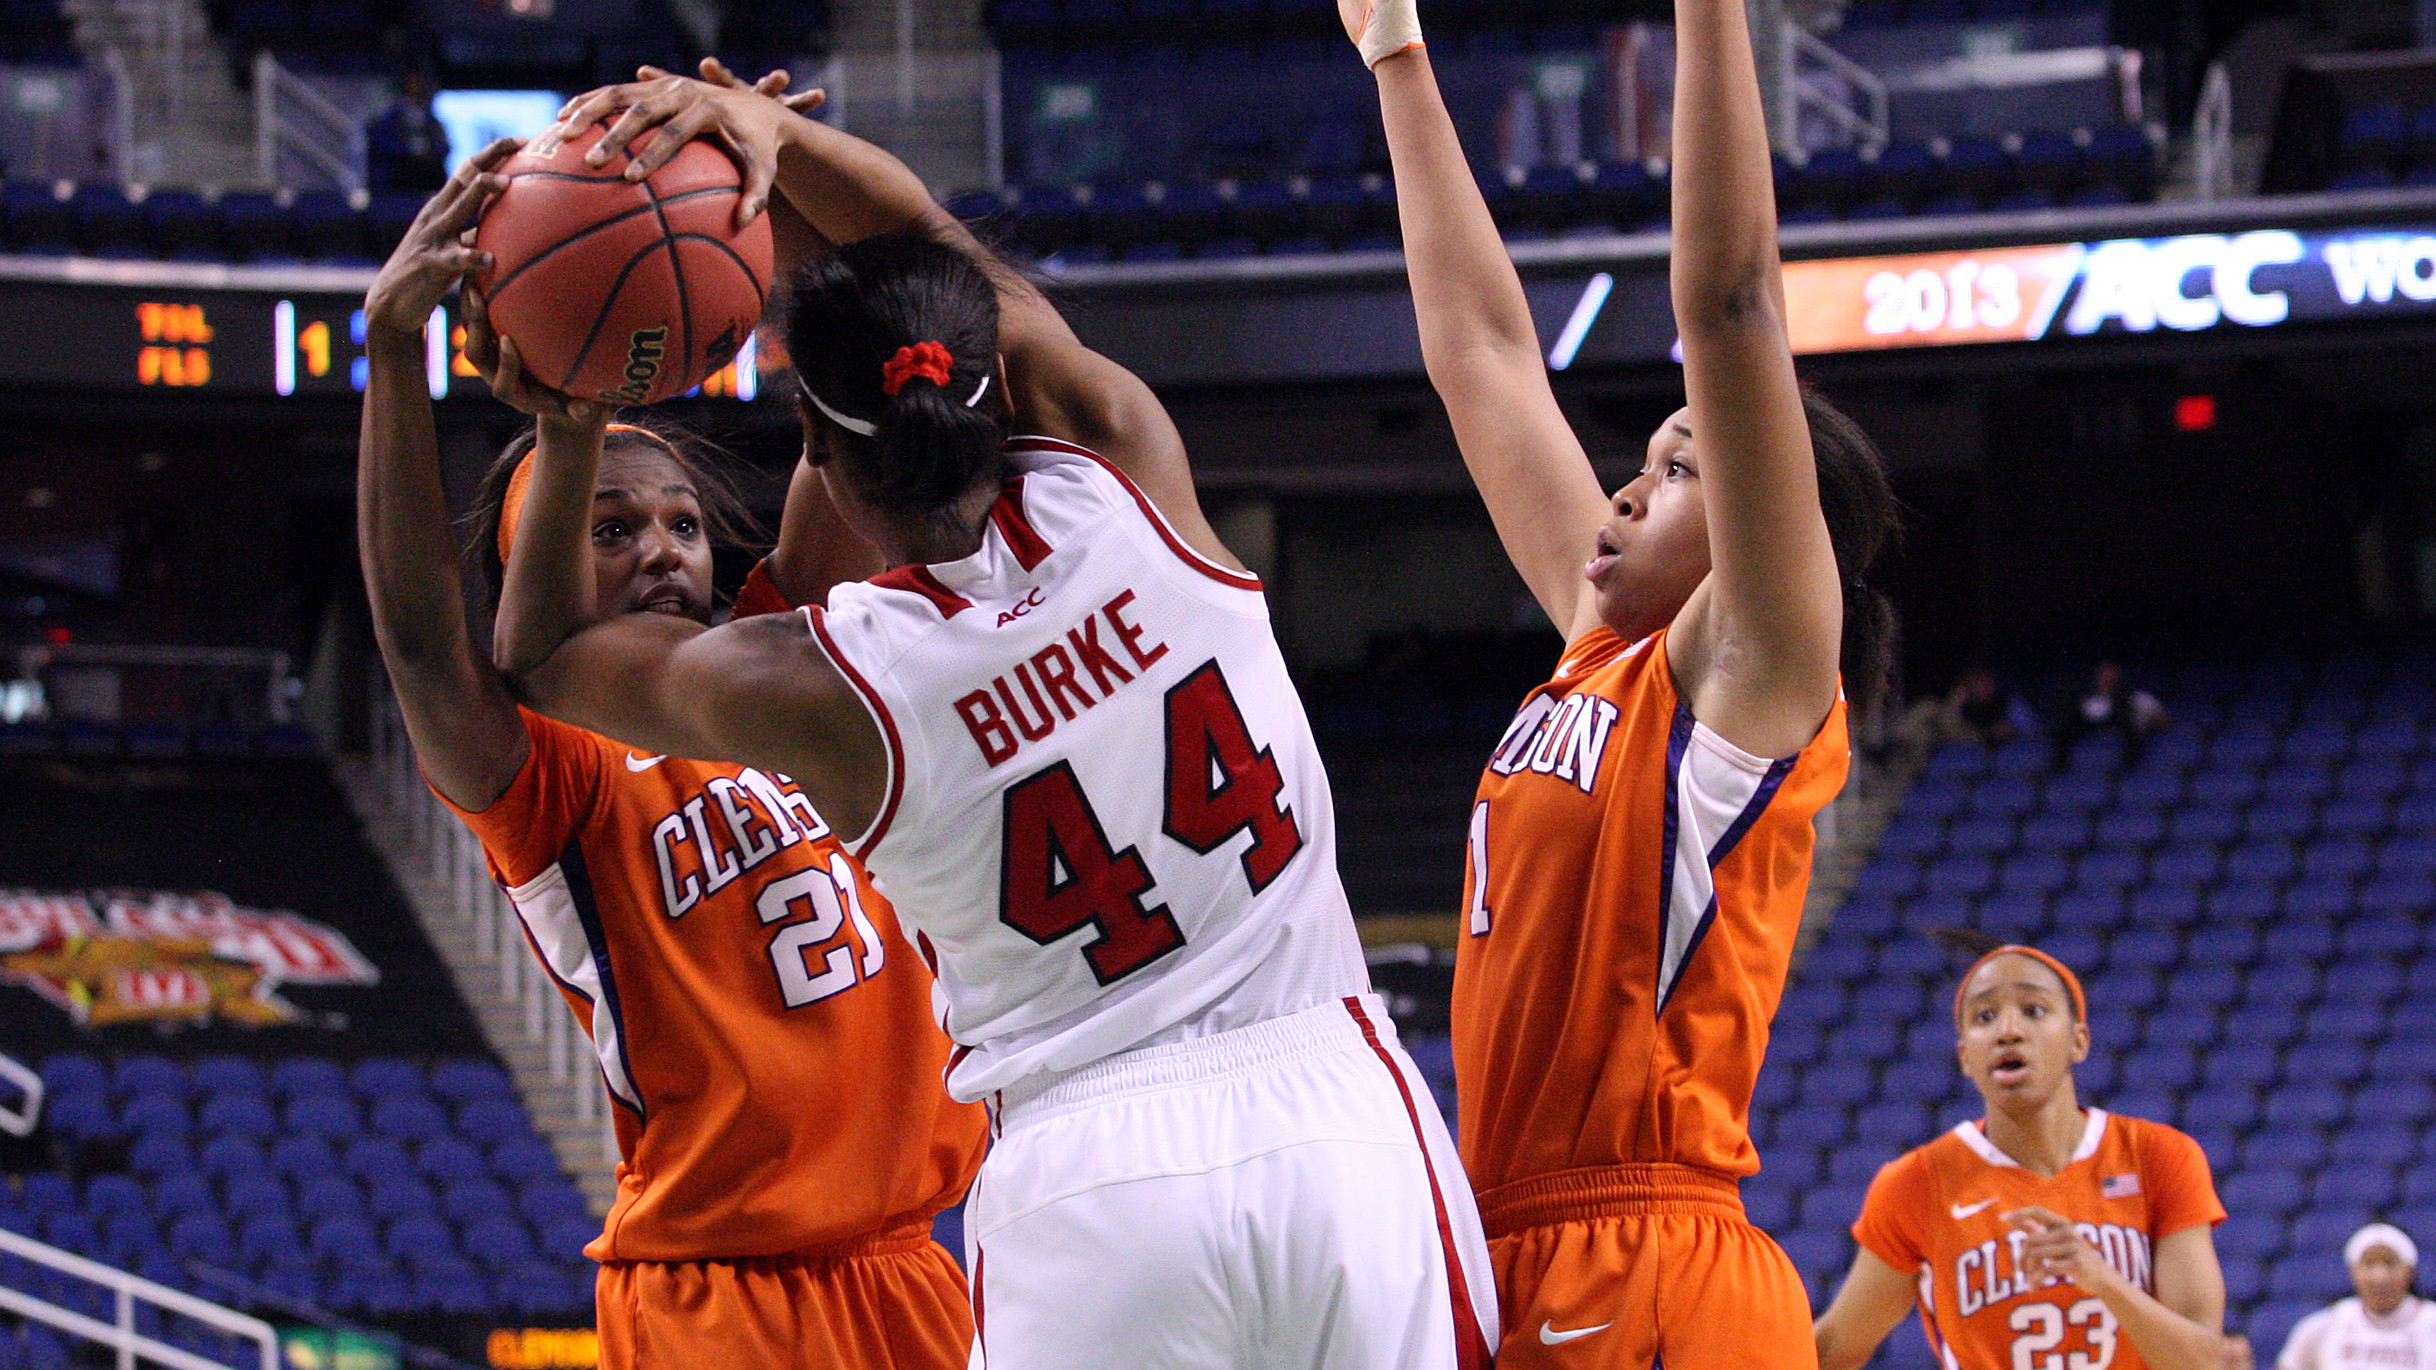 Lady Tigers Falter Late to NC State